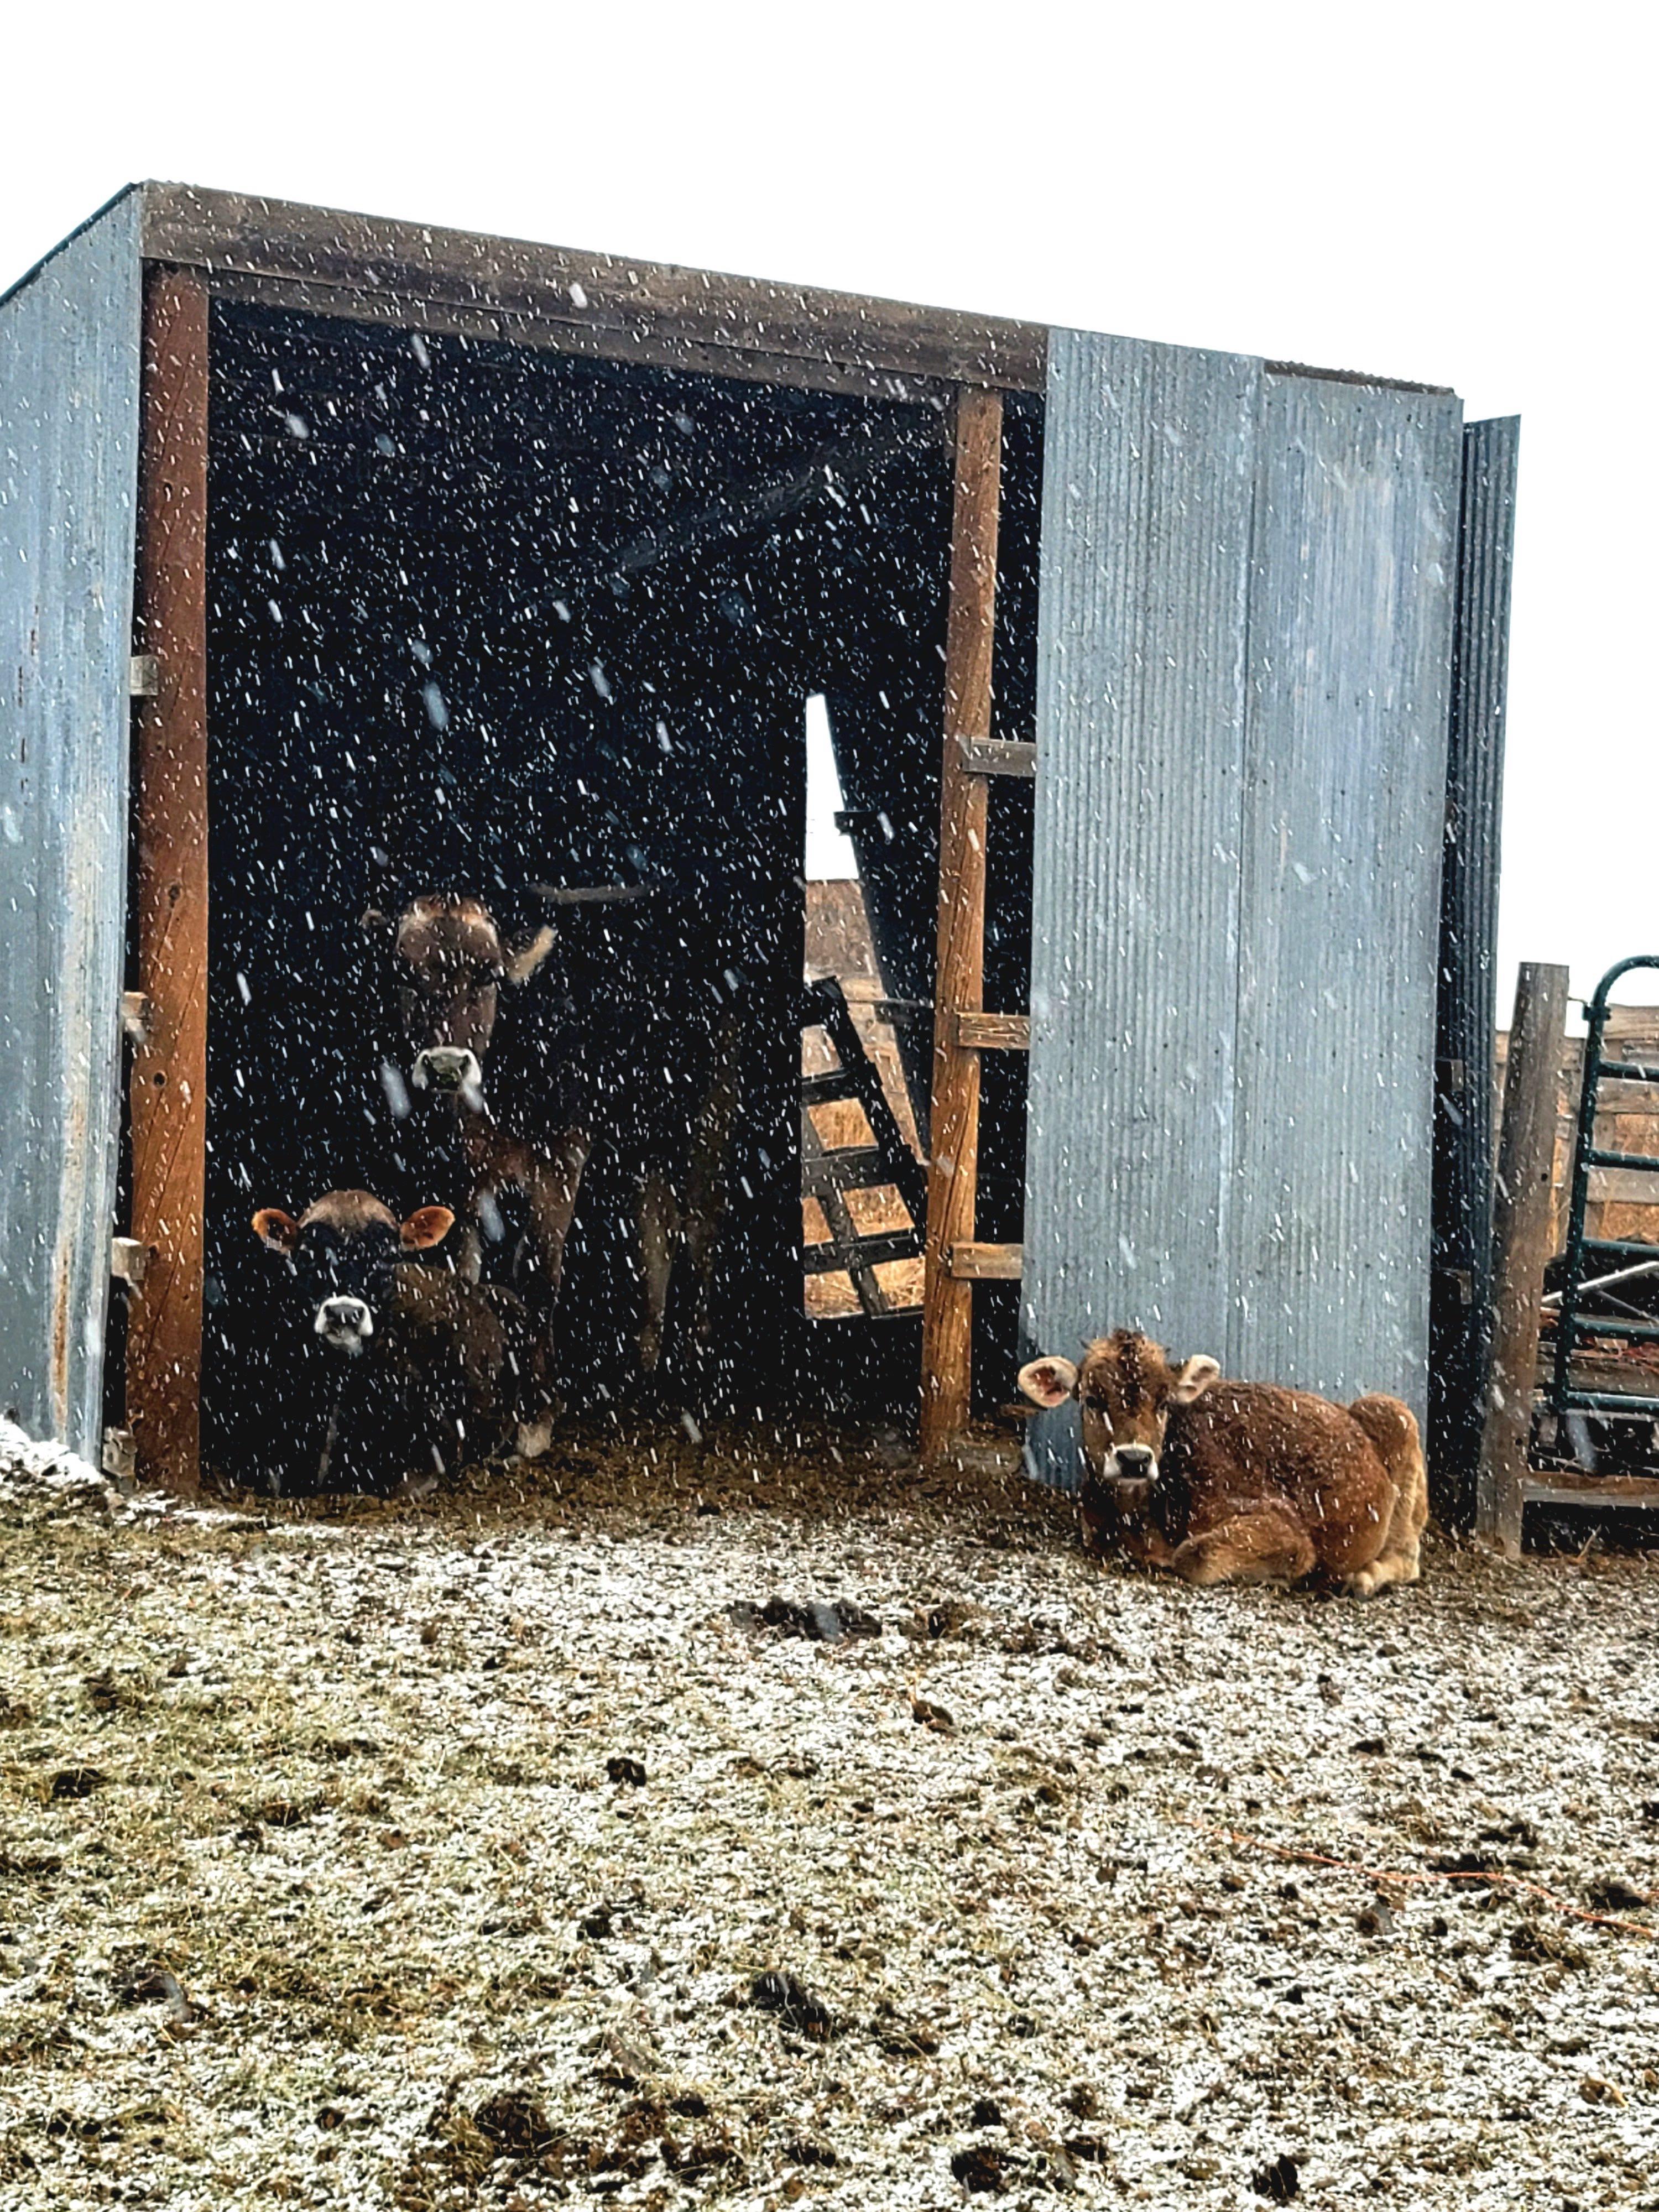 A mother and her two calves shelter from the falling snow in a makeshift shed, photo by Caren Leyva.